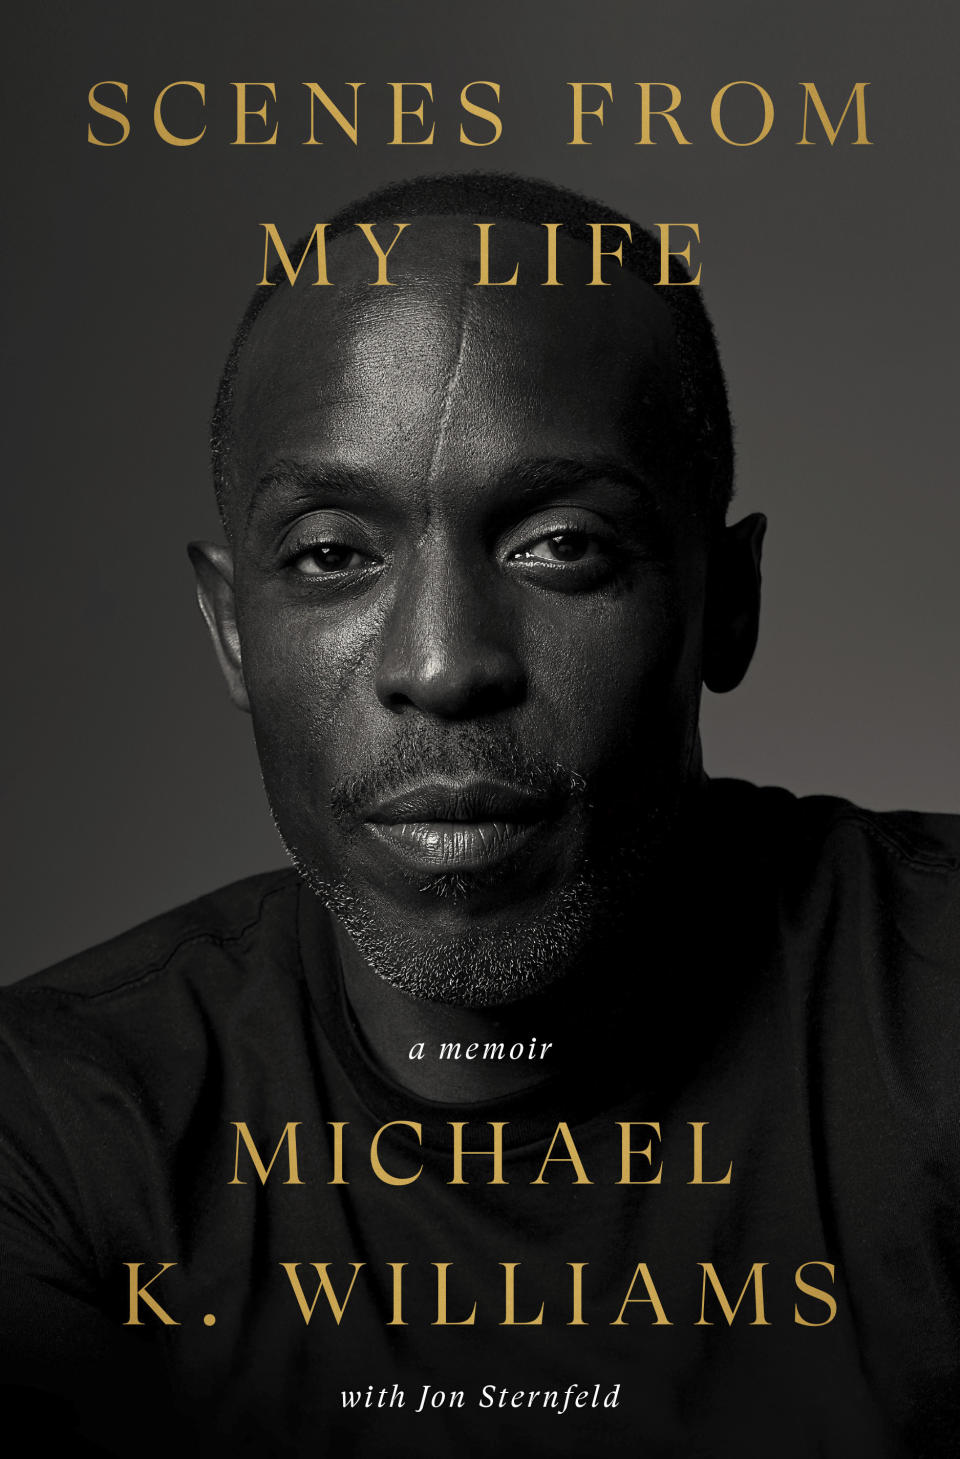 This cover image released by Crown shows "Scenes from My Life" by Michael K. Williams with Jon Sternfeld. (Crown via AP)